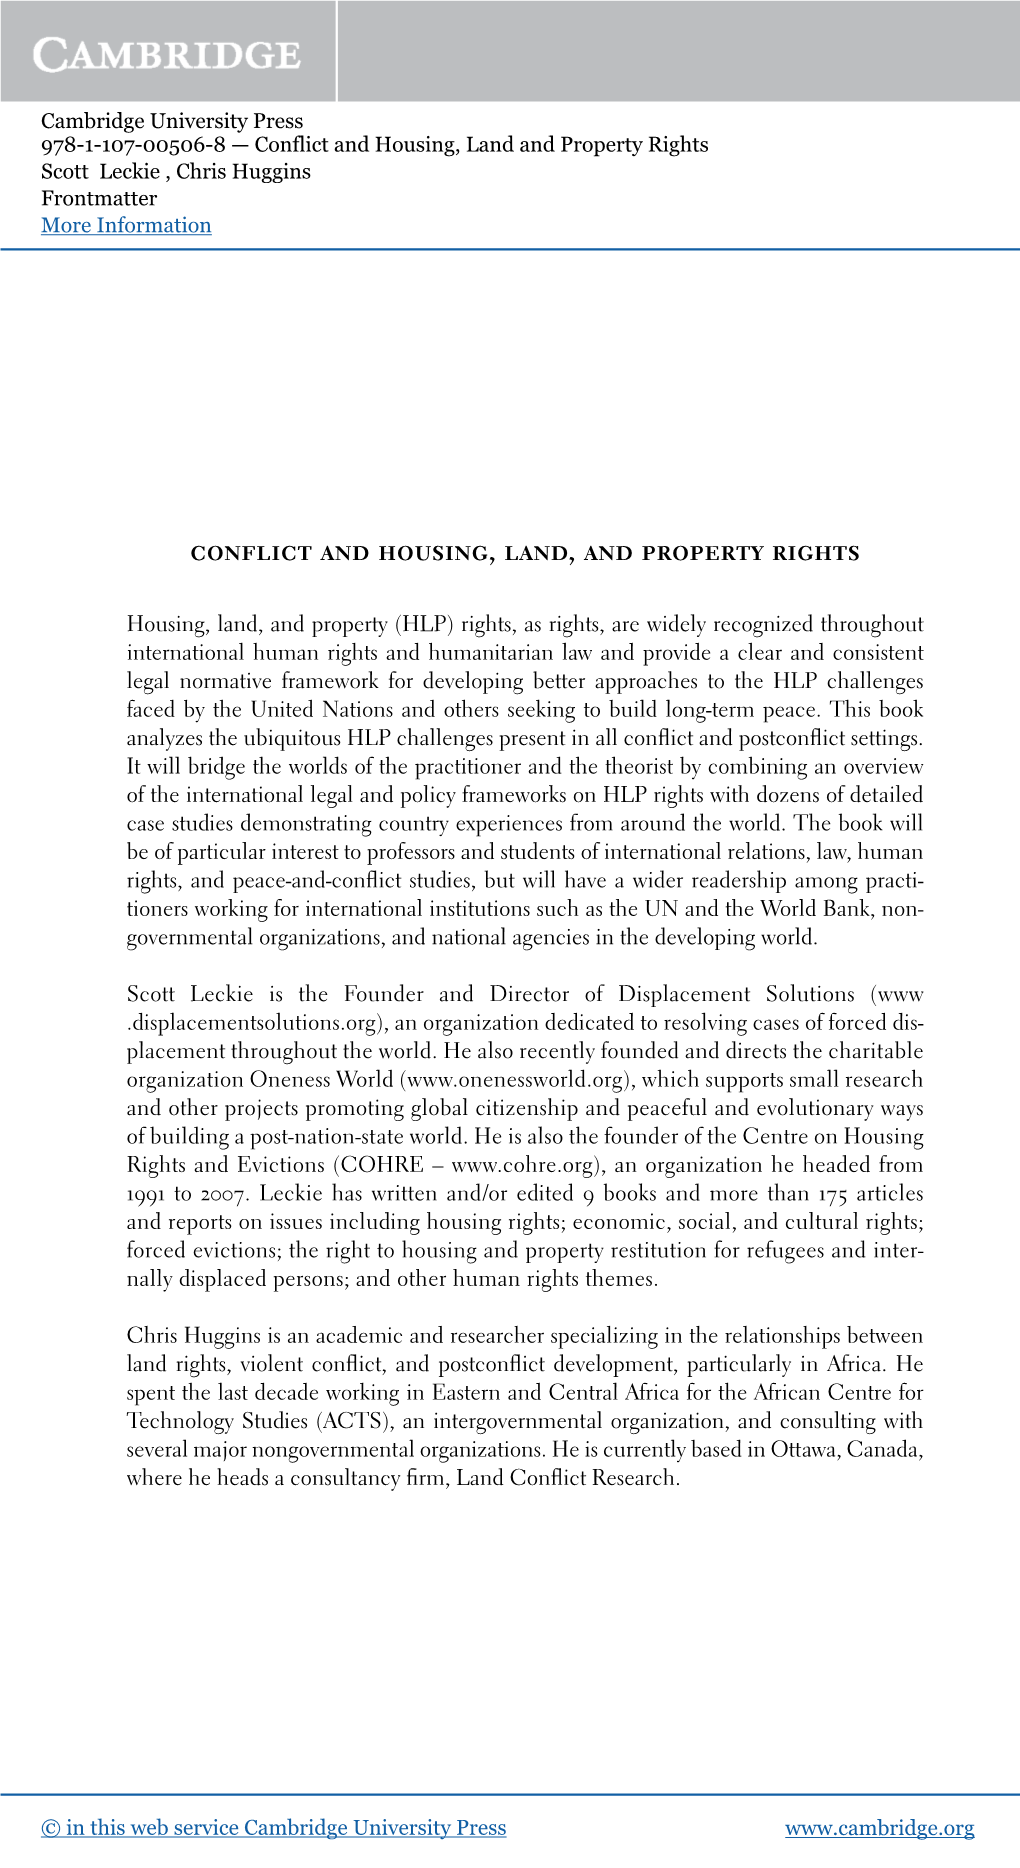 Conflict and Housing, Land, and Property Rights